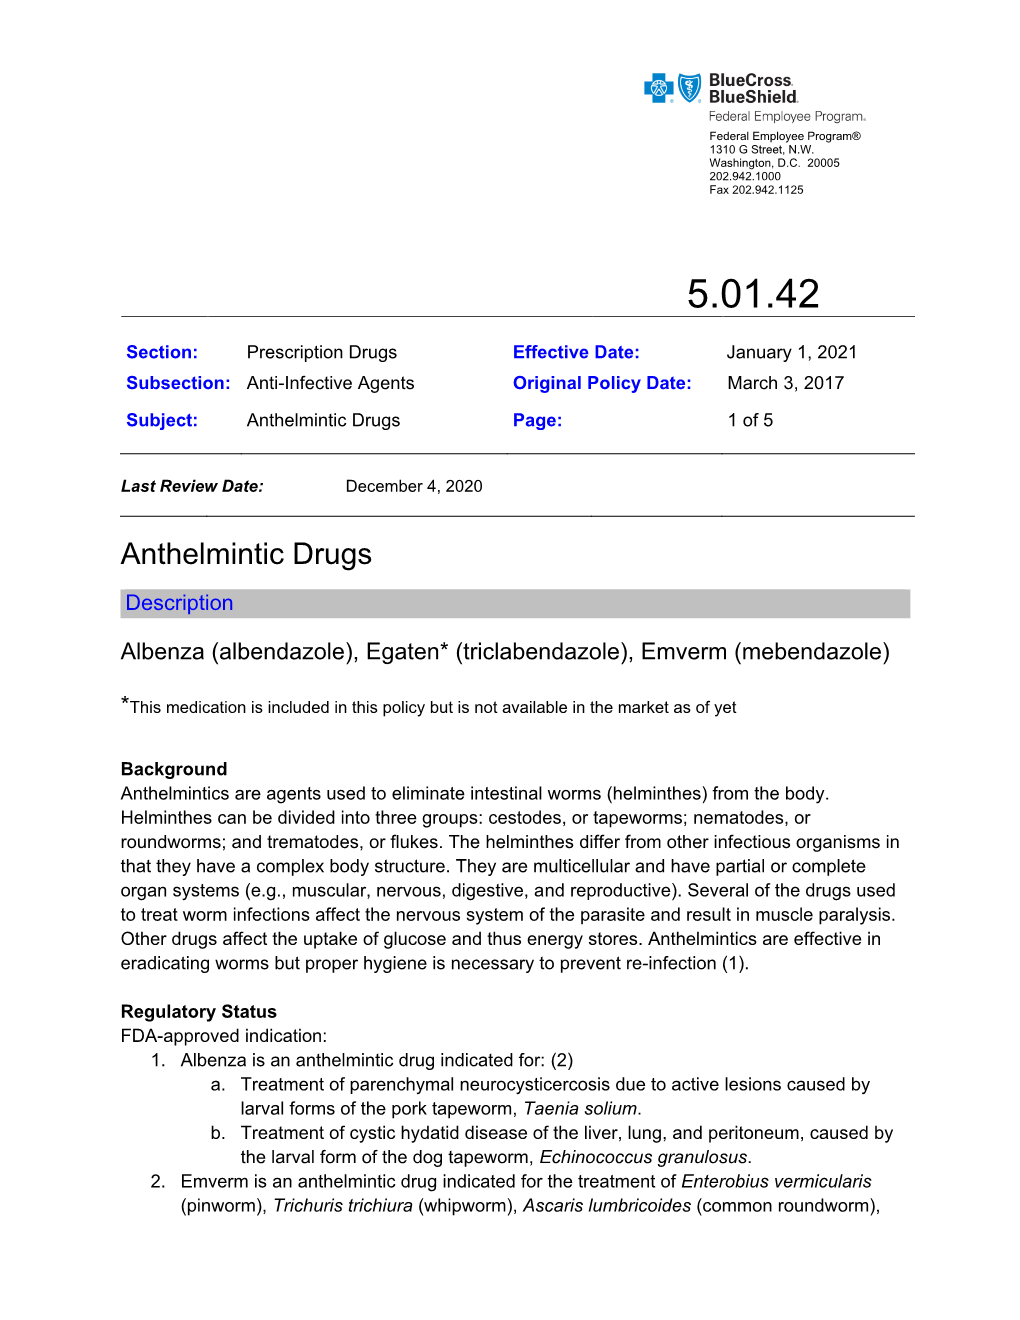 Anthelmintic Drugs Page: 1 of 5